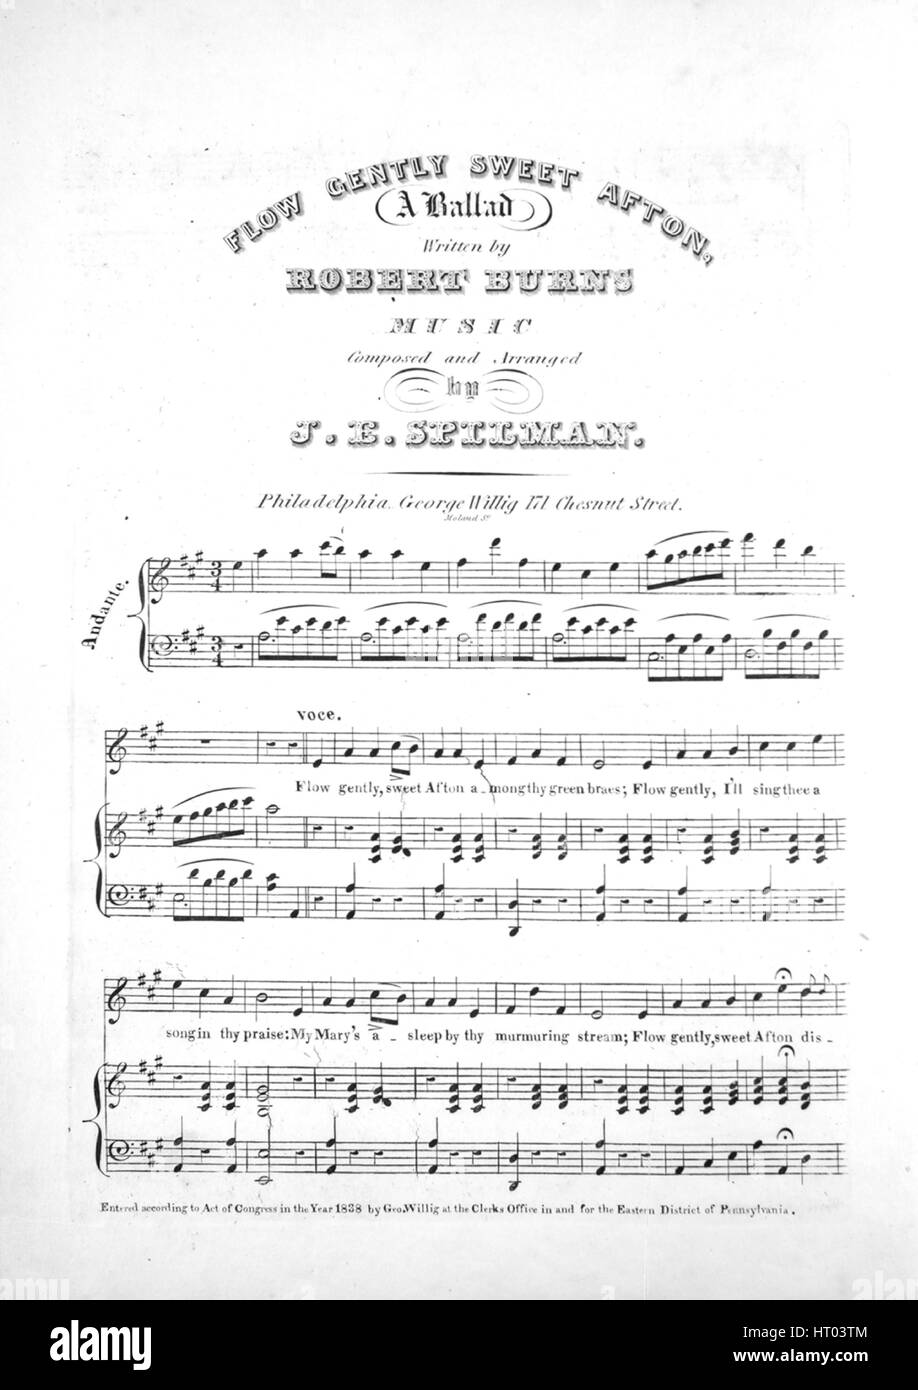 Sheet music cover image of the song 'Flow Gently Sweet Afton A Ballad',  with original authorship notes reading 'Written by Robert Burns Music  Composed and Arranged by JE Spilman', United States, 1838.